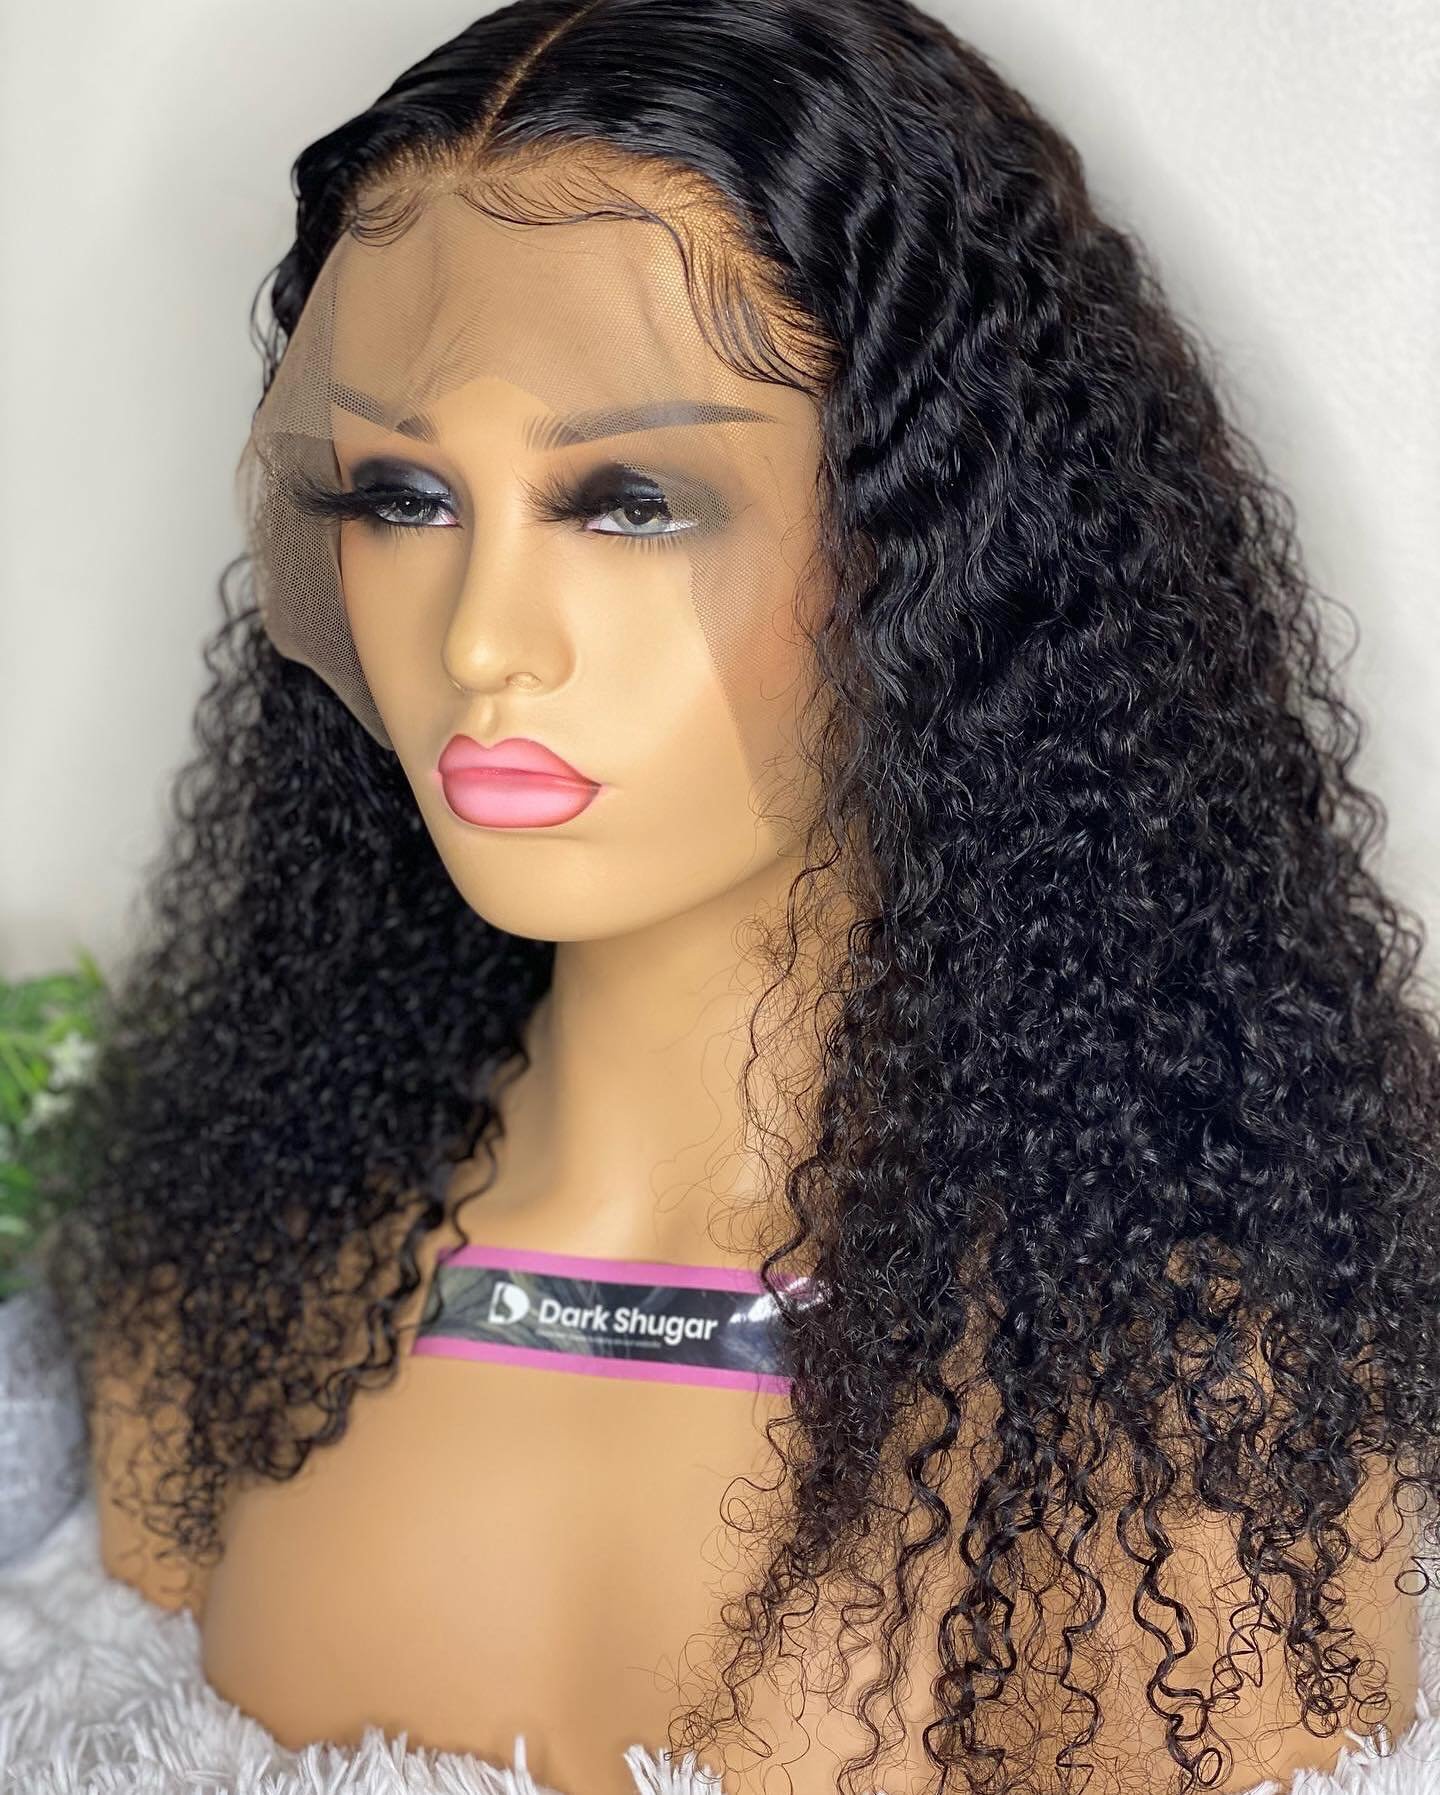 Stunning curls, always a best seller 👌🏽😍😍
Featuring the 🌸 &lsquo;EXOTIC CURLY&rsquo; 🌸Frontal Unit 

CURRENTLY IN STOCK 💨 

Shop with us at the 📍St. Vital Centre
Open Mon - Fri : 10-9pm , Sat: 10-6pm, Sun 11-6pm

Also shop with us online 👉🏽